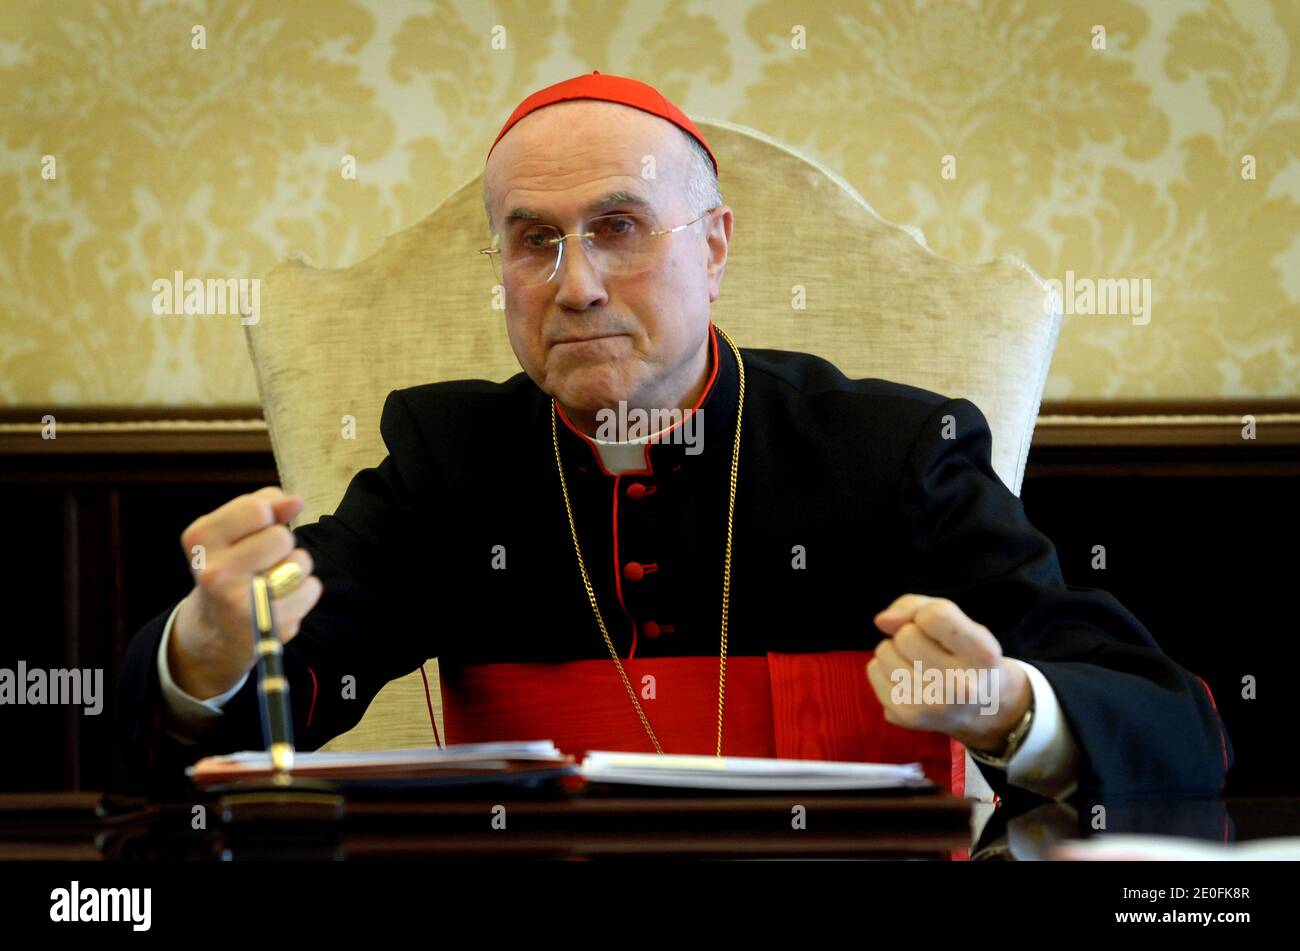 Cardinal Tarcisio Bertone , Vatican Secretary of State at the Vatican on March 17,2007. The Secretary of State is the 2nd-ranking official at the Vatican, with broad authority over the internal and external policies of the Holy See.An atmosphere of scandal shrouds the Apostolic Palace at the Vatican on May 2012. The pope's butler has been arrested in its embarrassing leaks scandal, adding a Hollywood twist to a sordid tale of power struggles, intrigue and corruption in the highest levels of Catholic Church governance. Vatican documents leaked to the press in recent months have undermined that Stock Photo